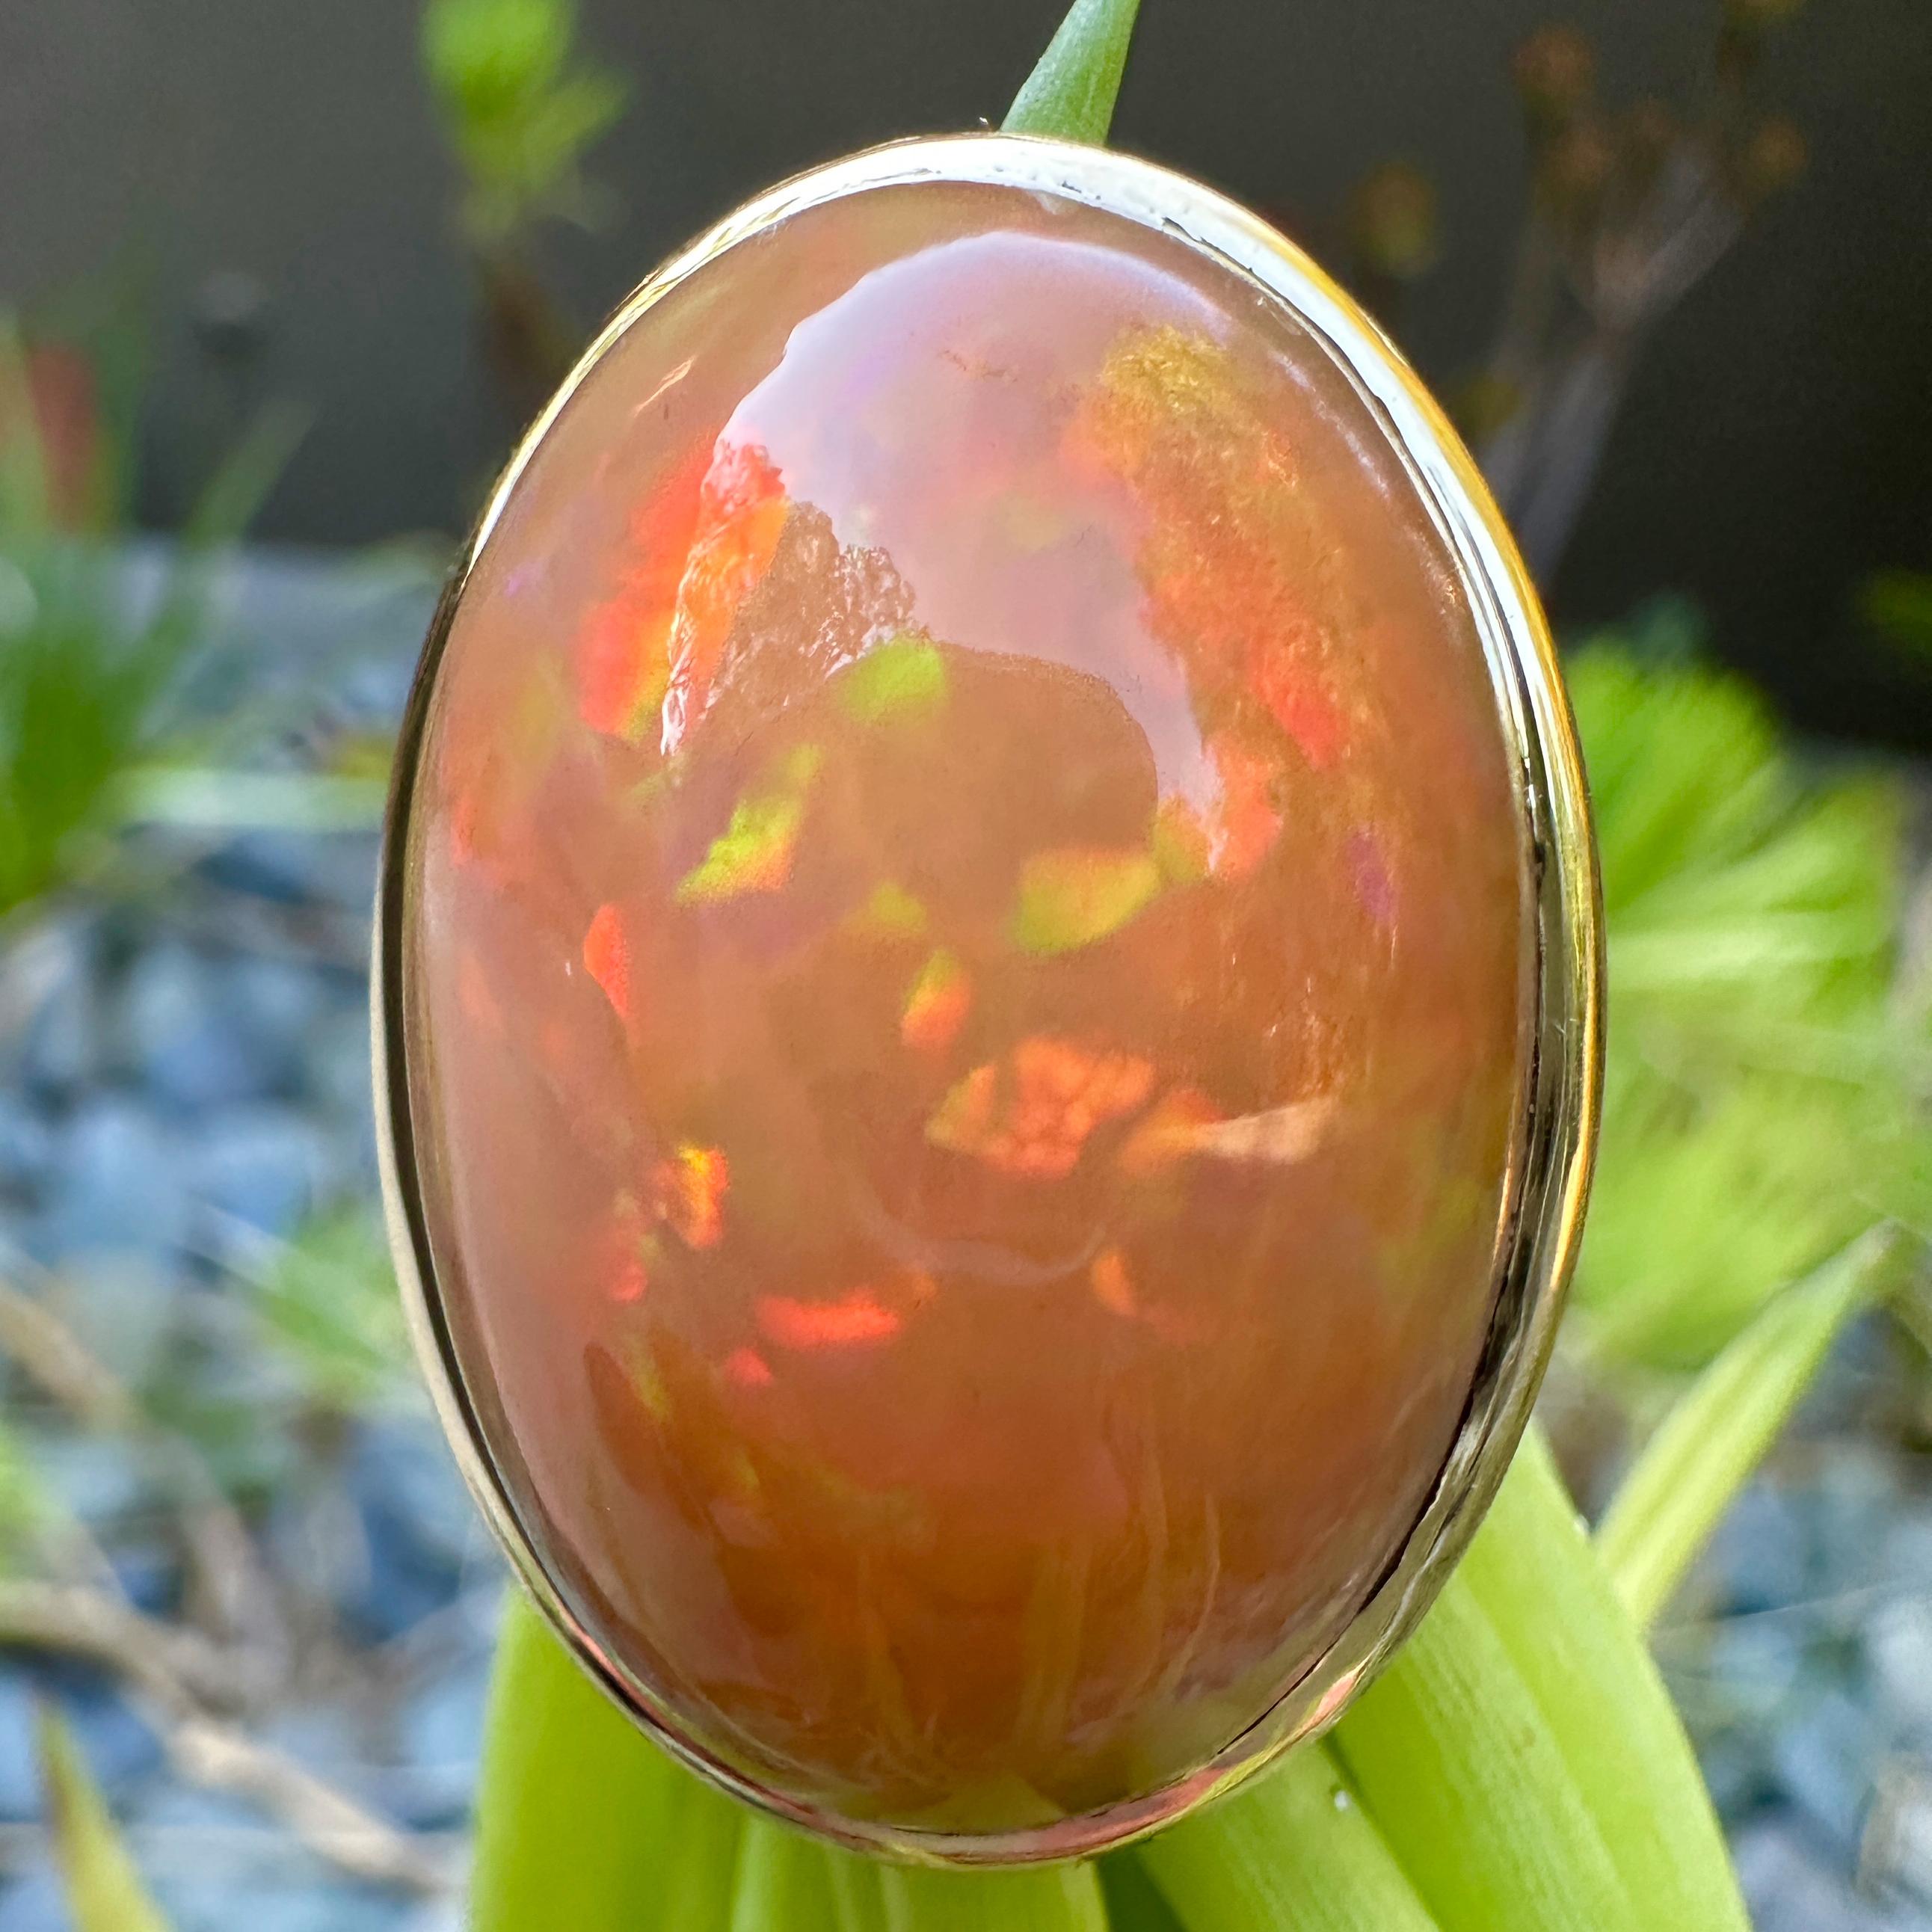 35 Carat Orange Ethiopian Opal in Brushed 18 Karat Yellow Gold Cocktail Ring In New Condition For Sale In Sherman Oaks, CA